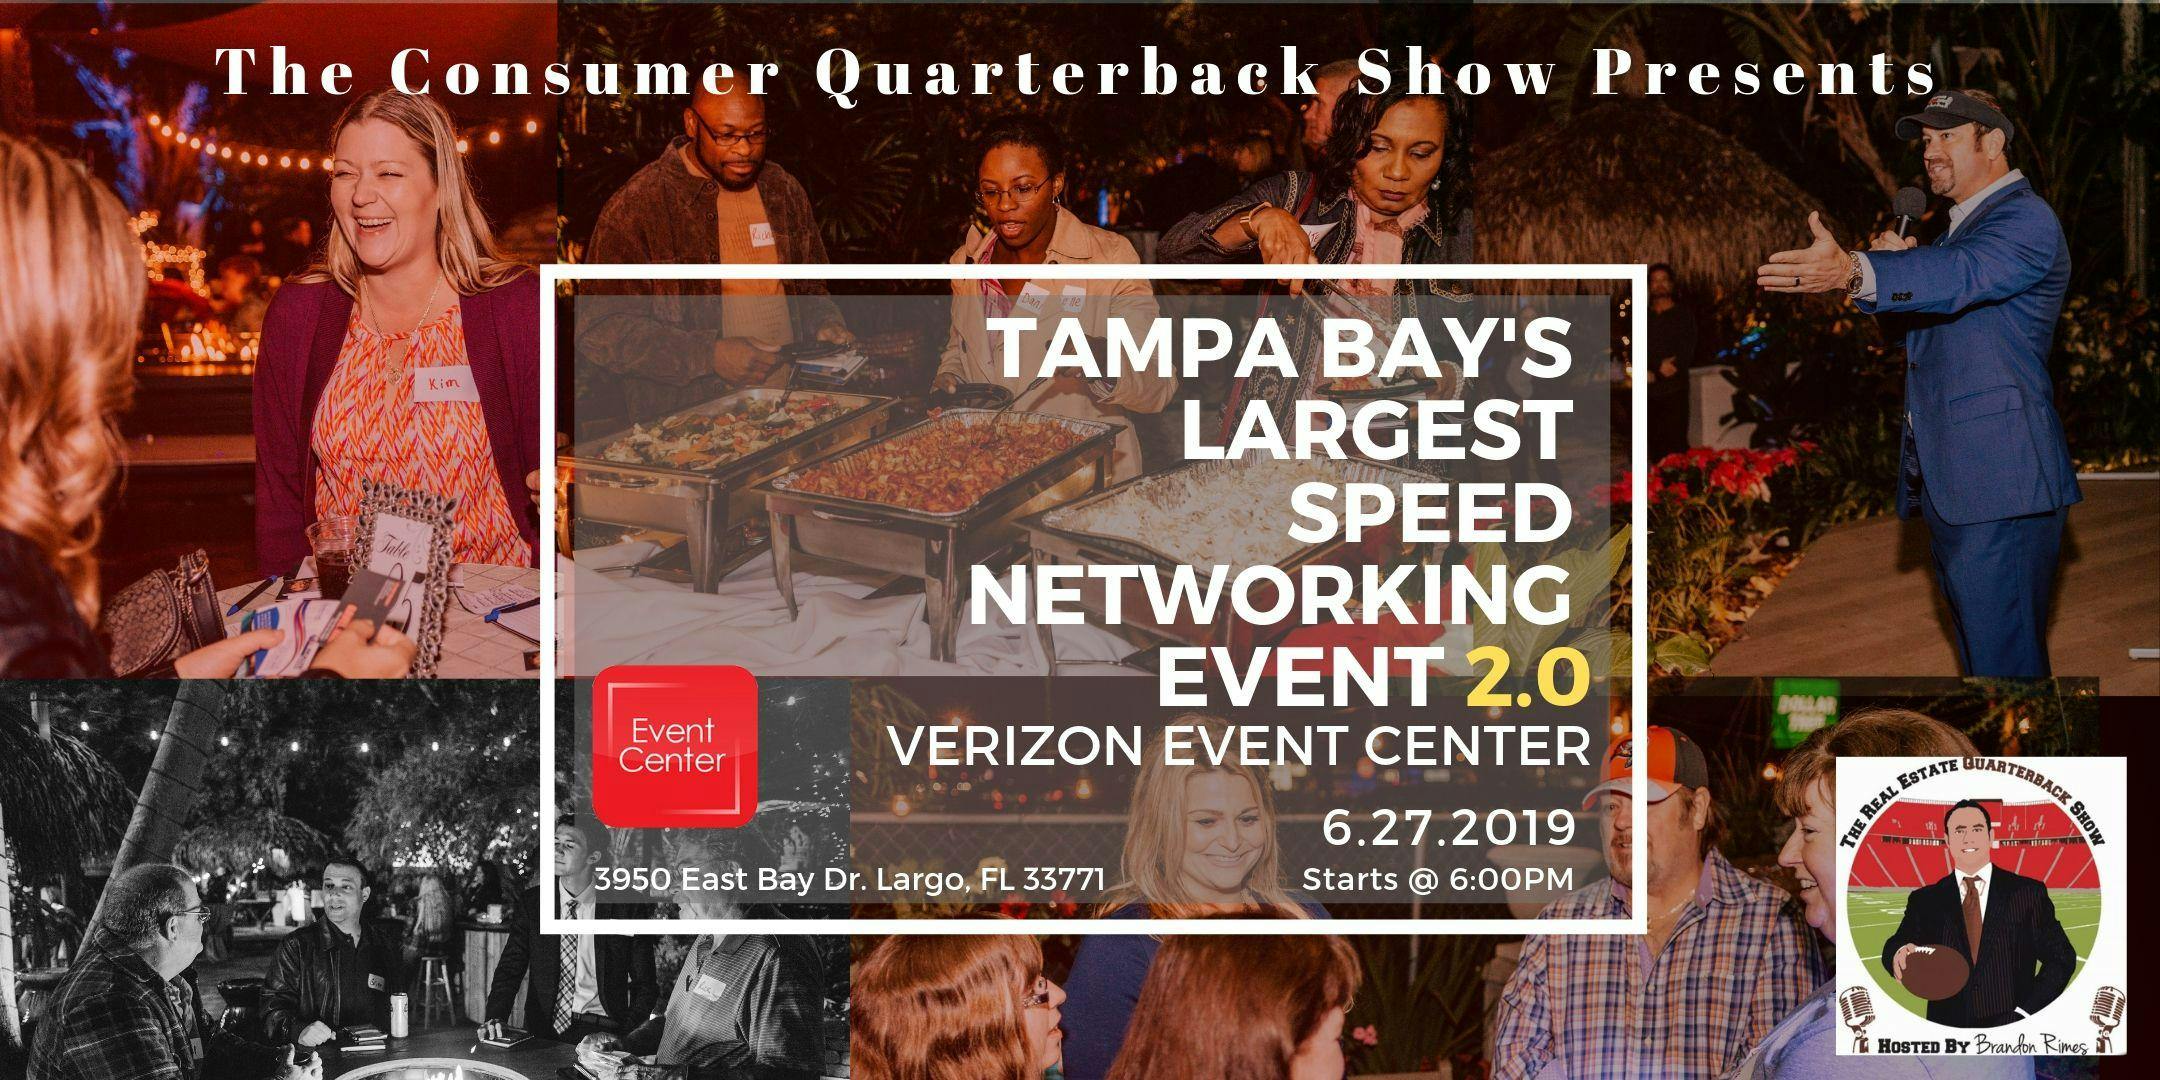 Tampa Bay's Largest Speed Networking Event 2.0 